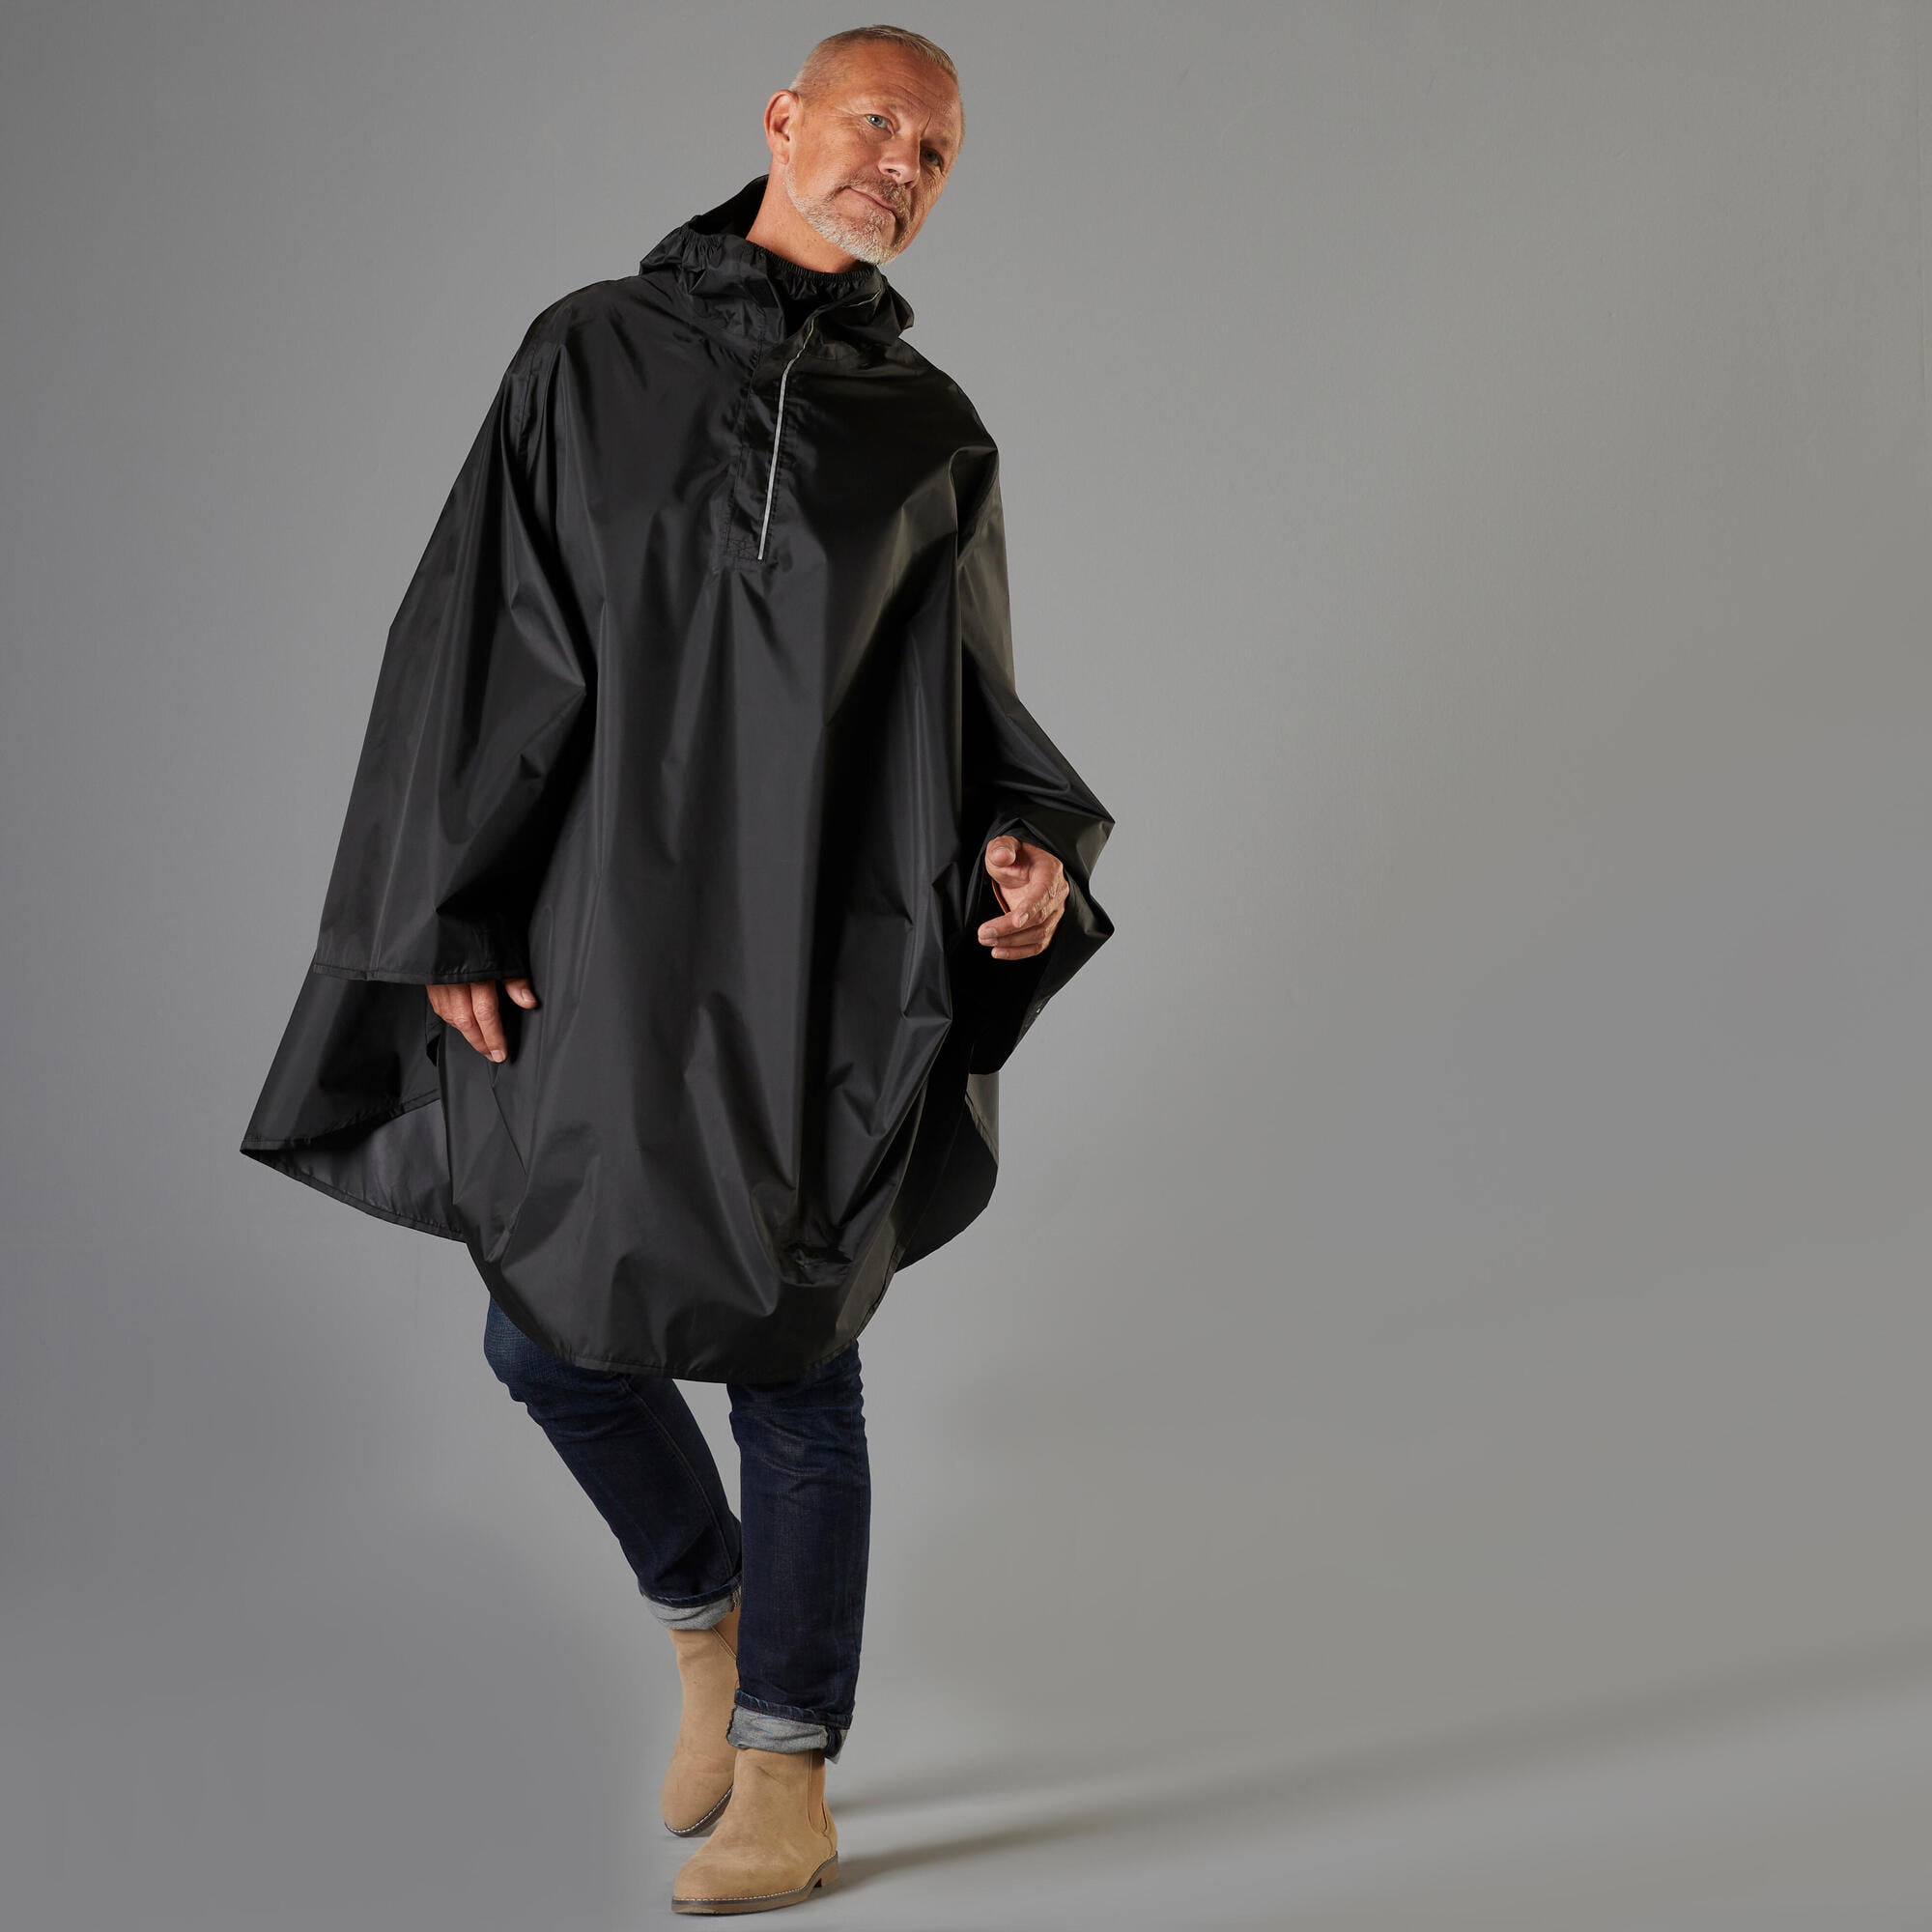 NAVY BLUE PONCHO 2000MM WATERPROOF RATED WITH TAPE SEALED SEAMS 